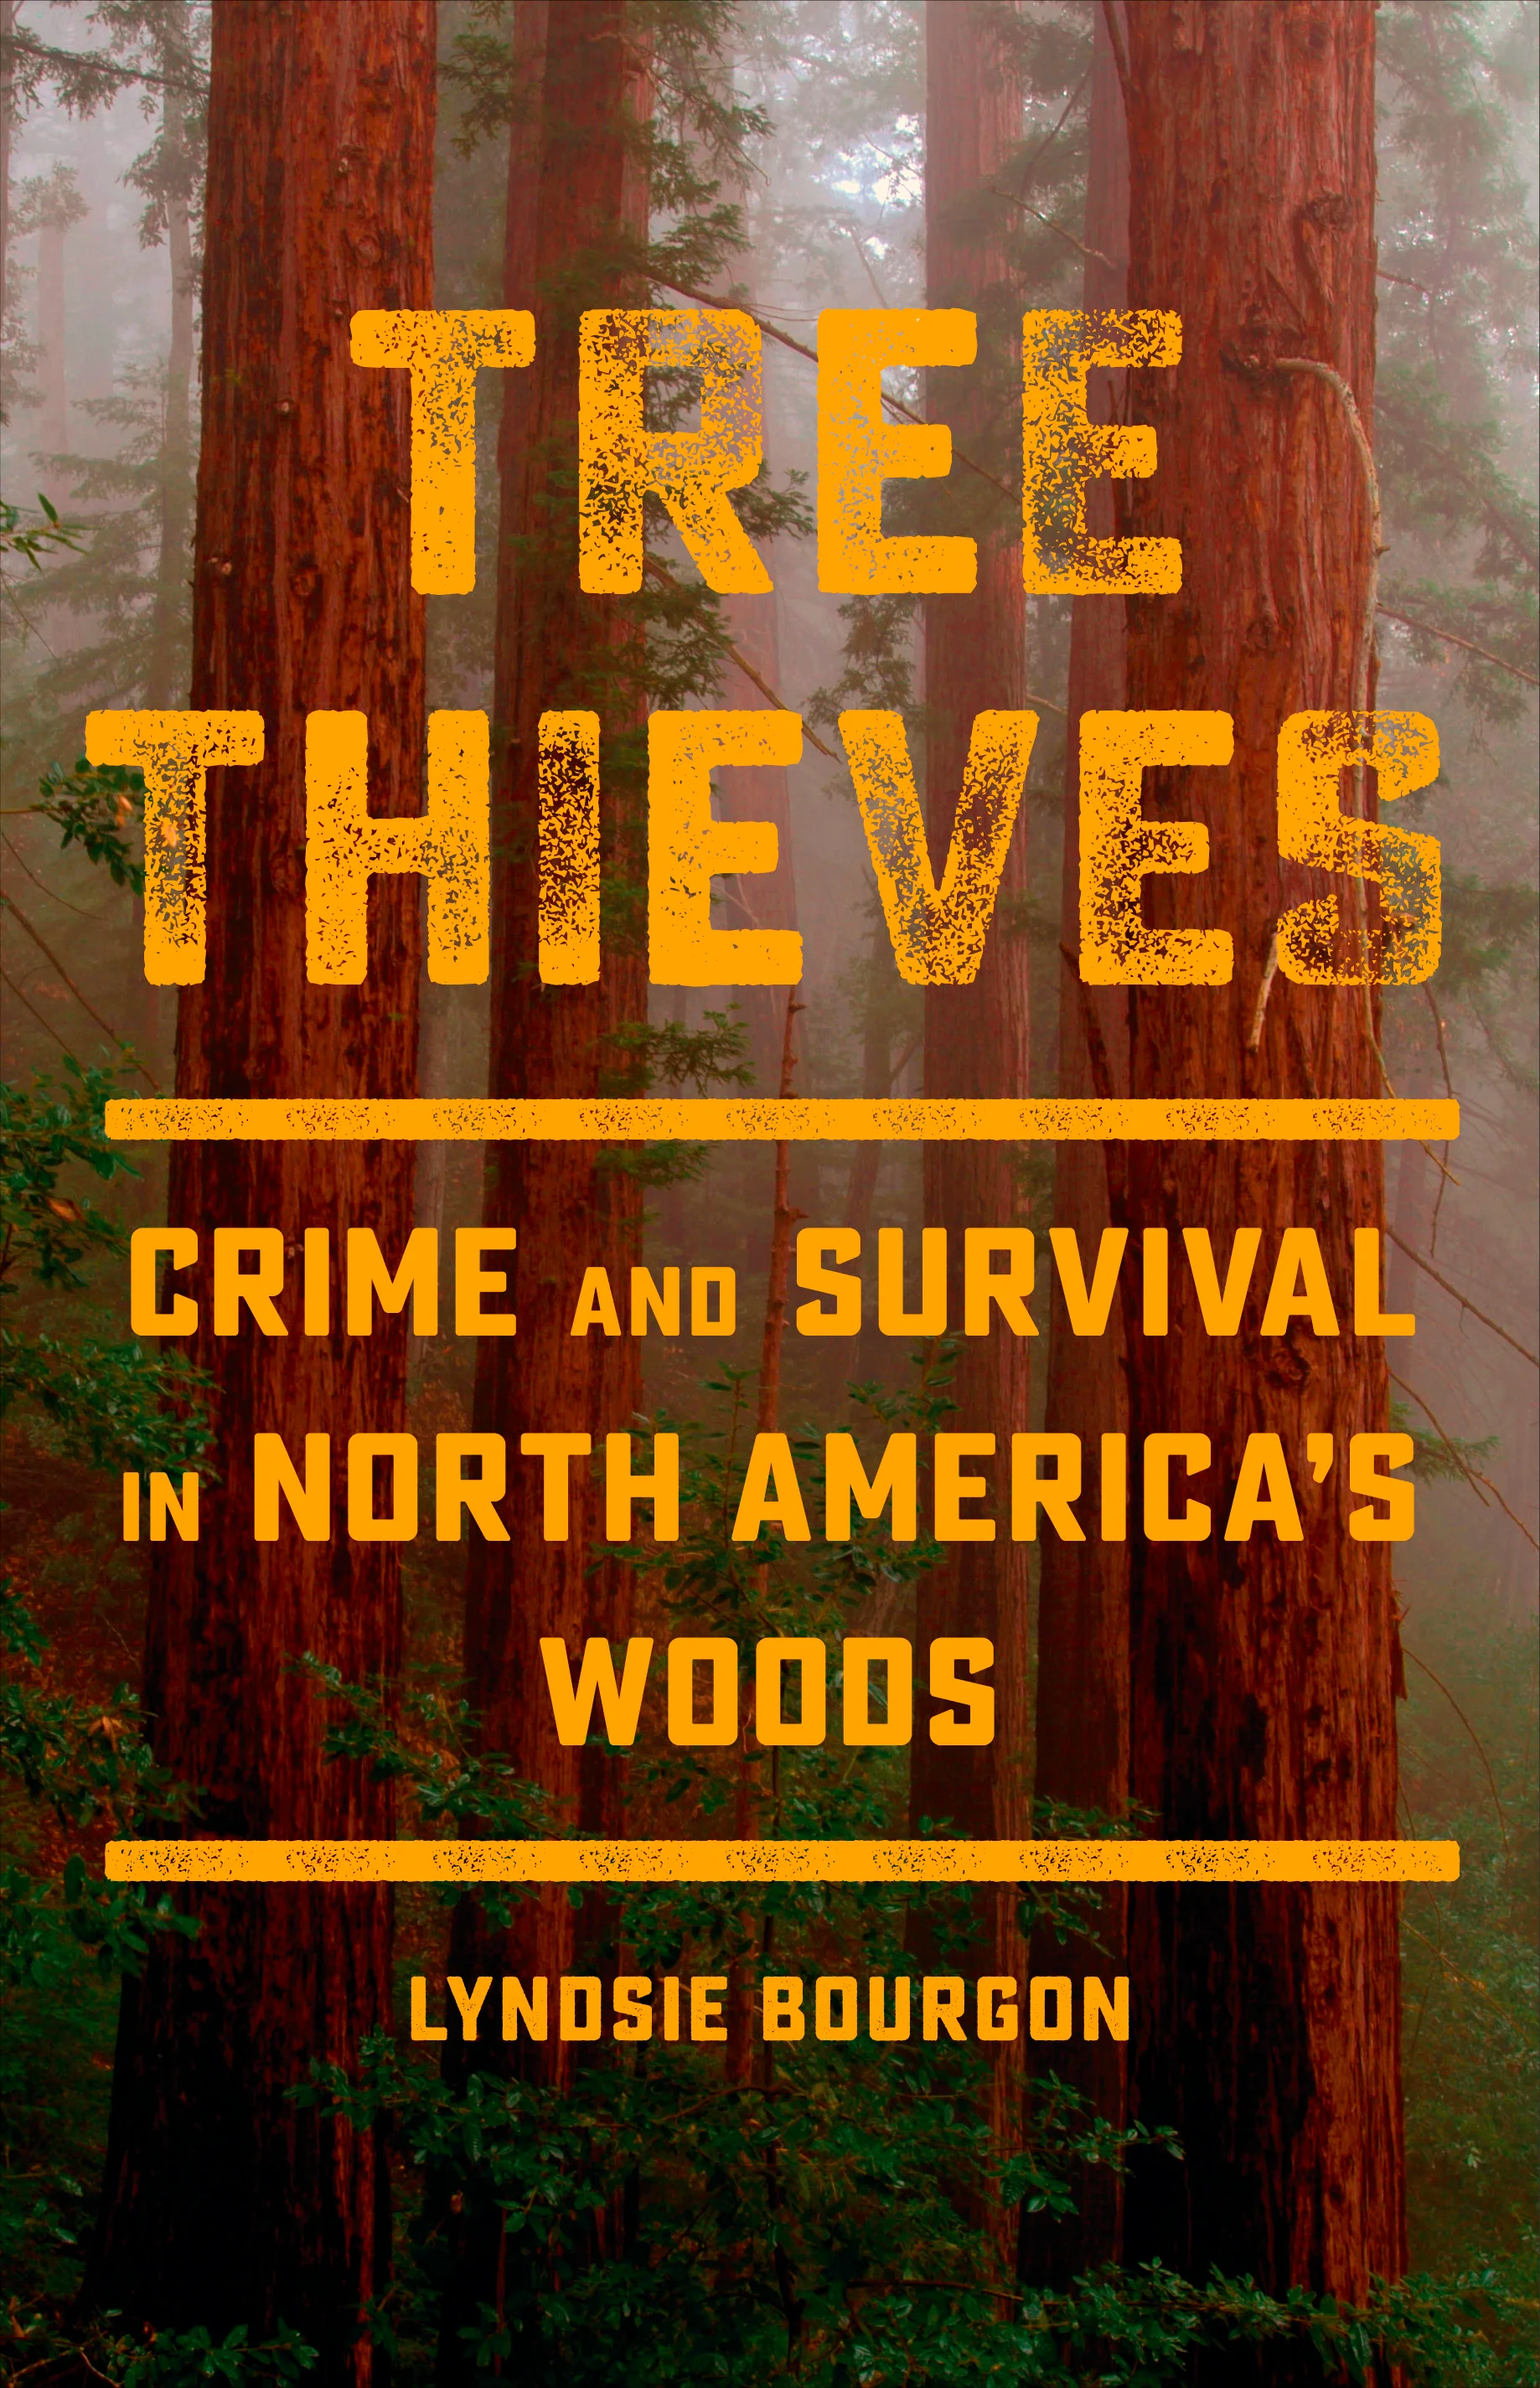 Tree Thieves: Crime and Survival in North America’s Woods